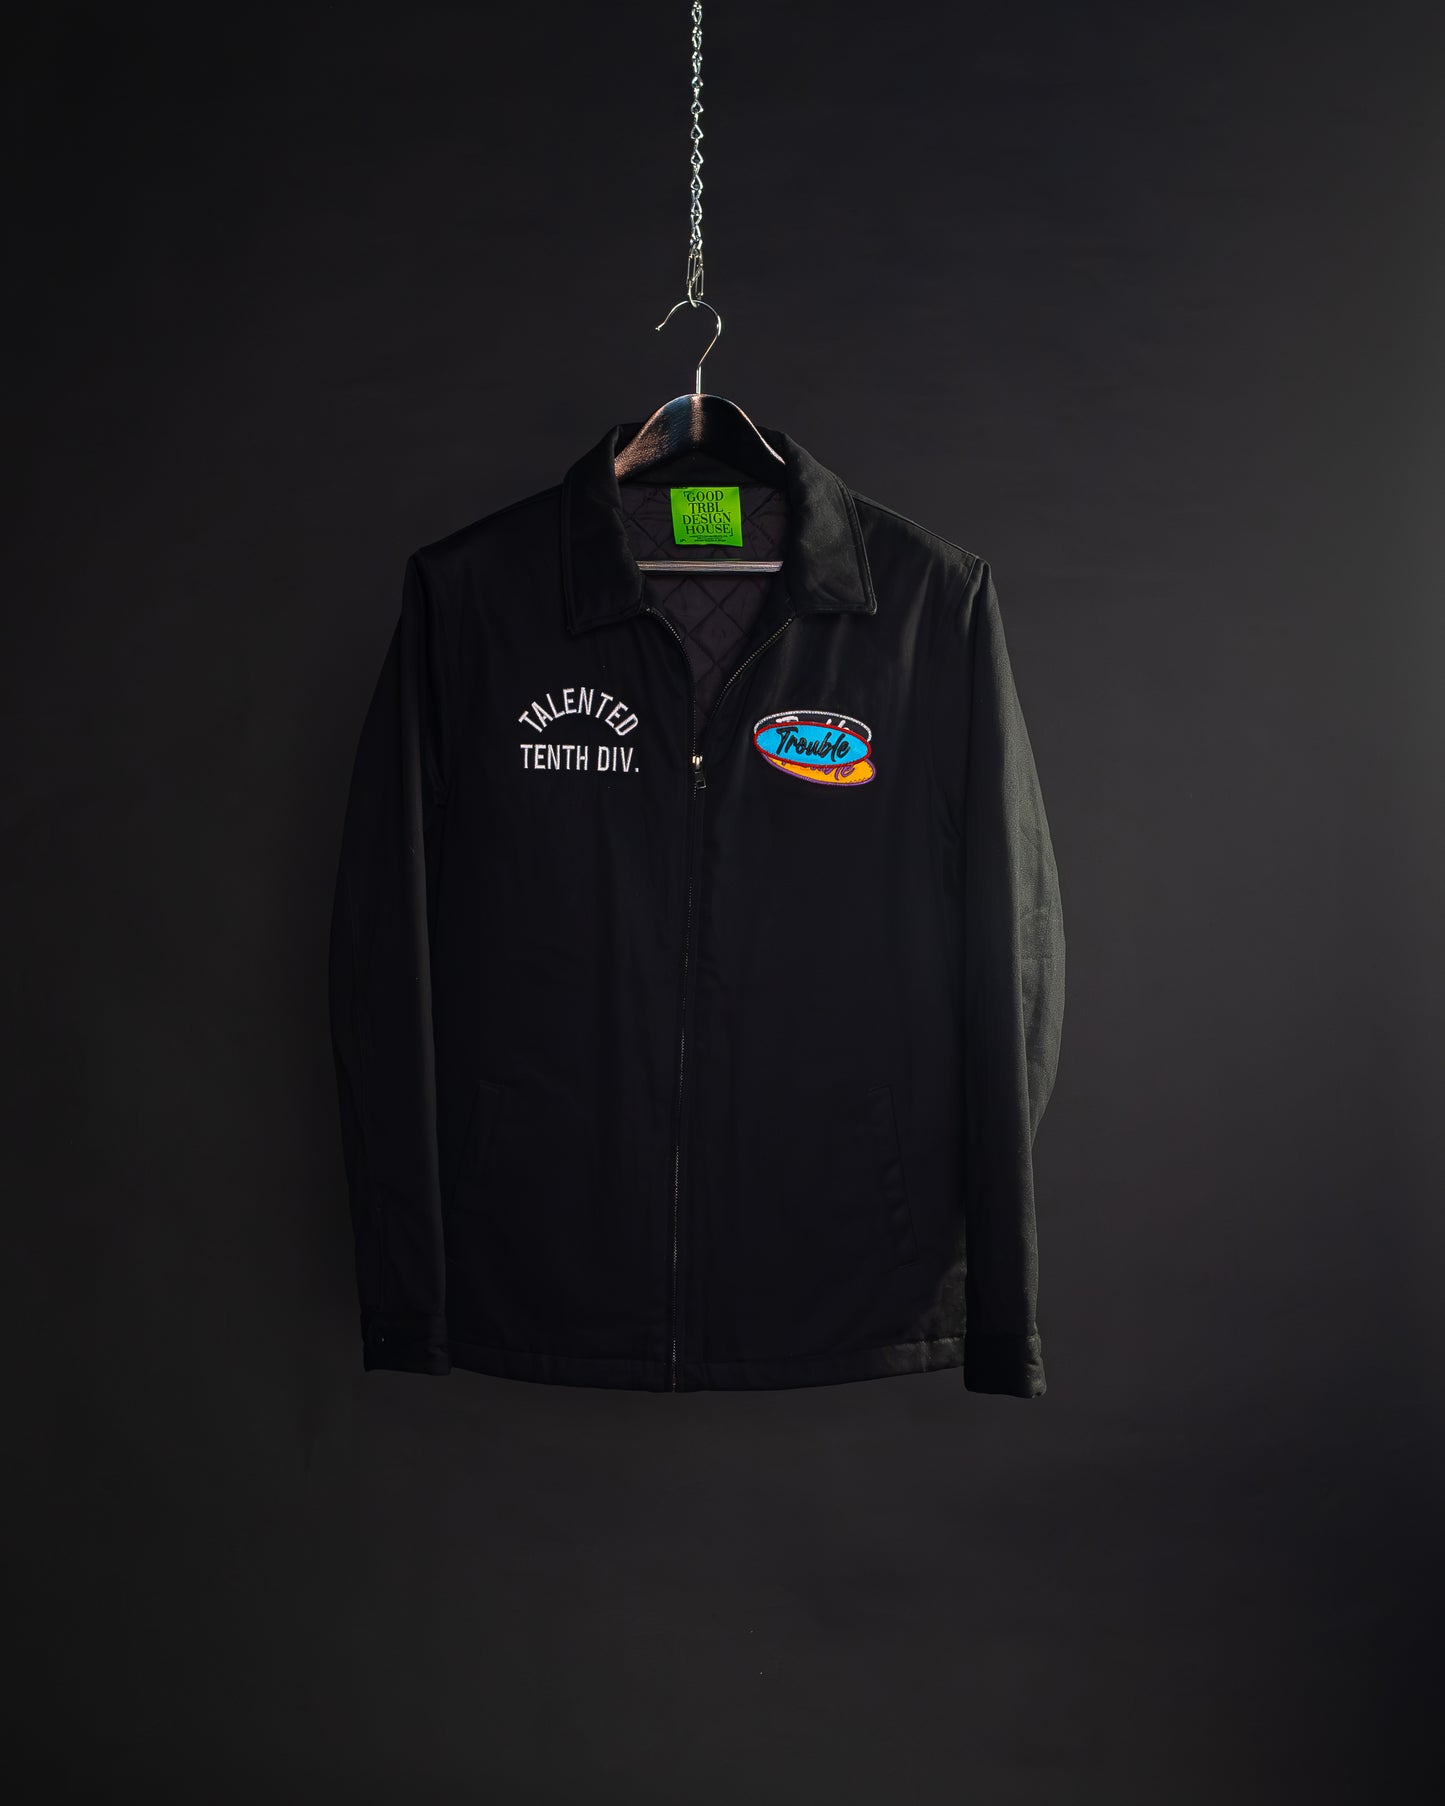 Service Jacket (Talented Tenth)